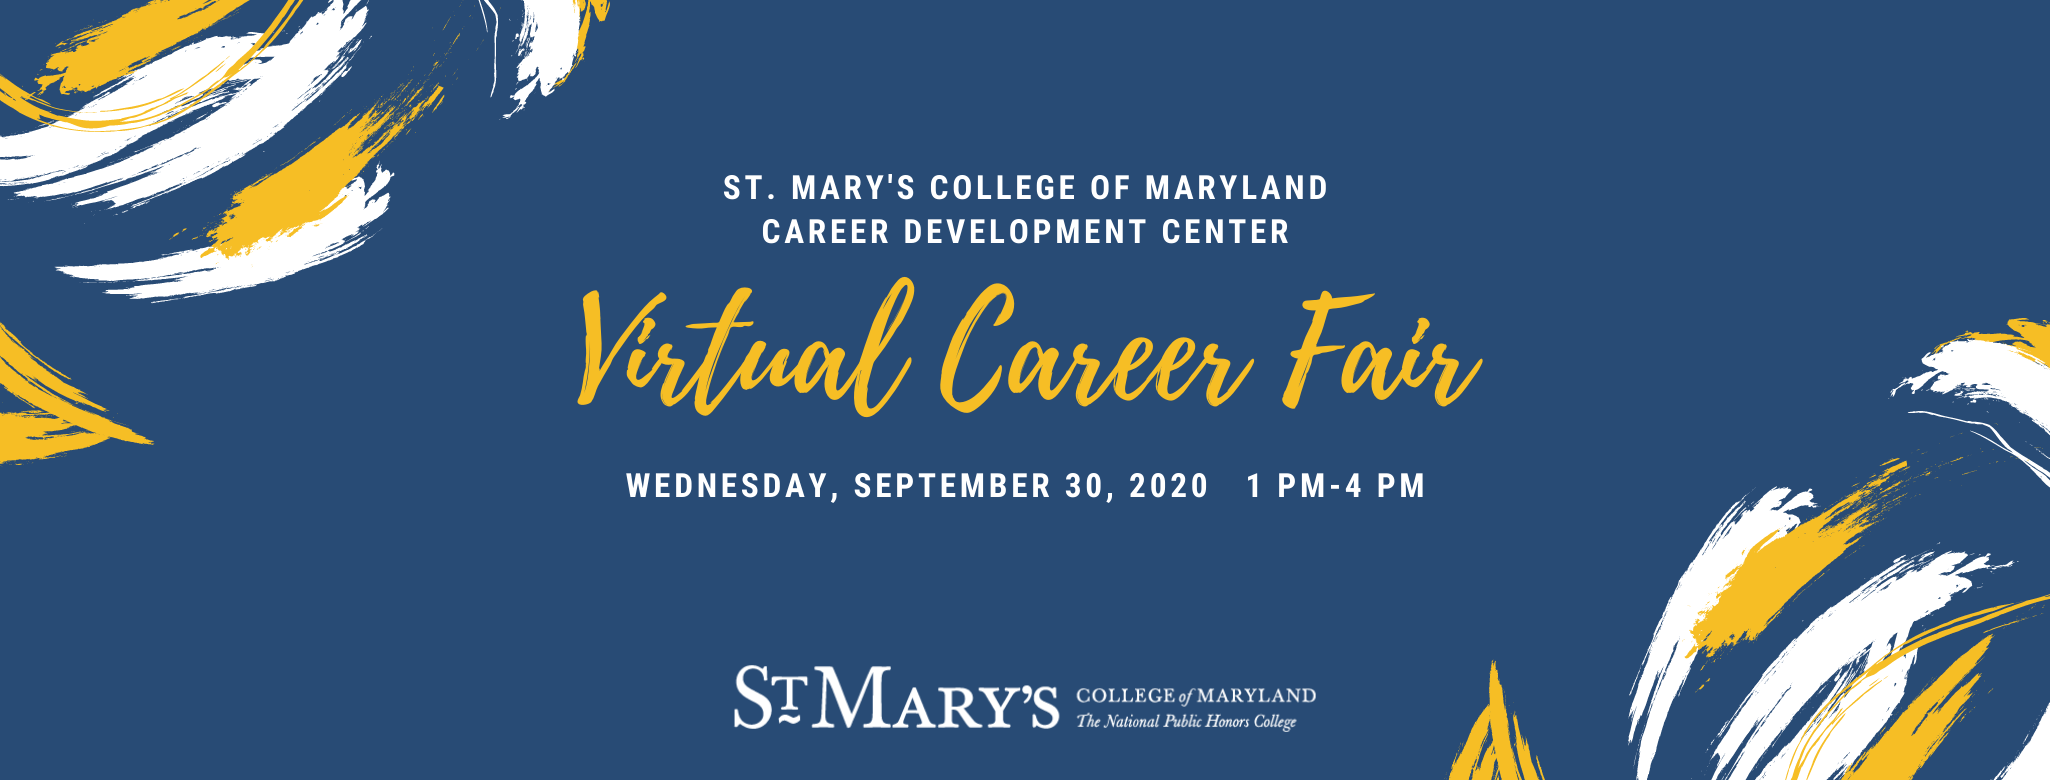  Virtual Career Fair on Wednesday, September 30, 2020, from 1 pm- 4 pm through HireSMCM, but you must RSVP in advance in order to attend. 